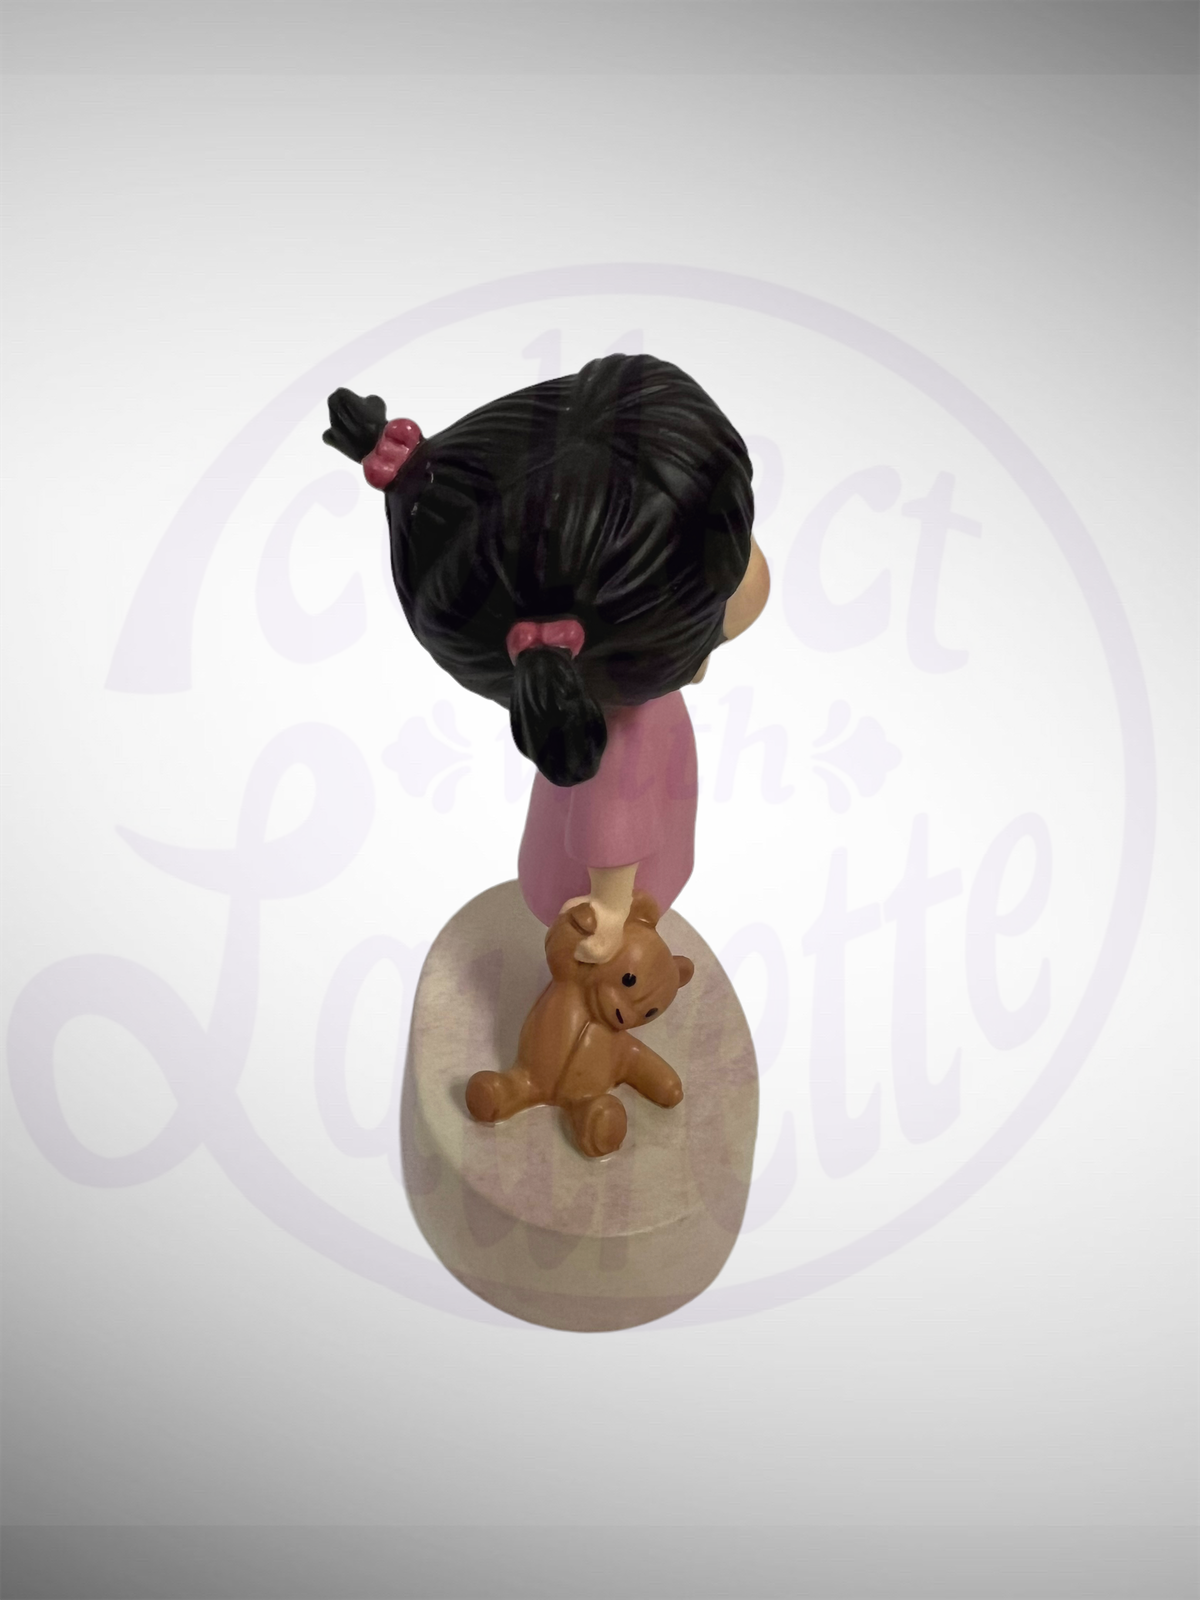 Walt Disney Classics Collection - WDCC Monsters Inc Boo Kitty Figurine